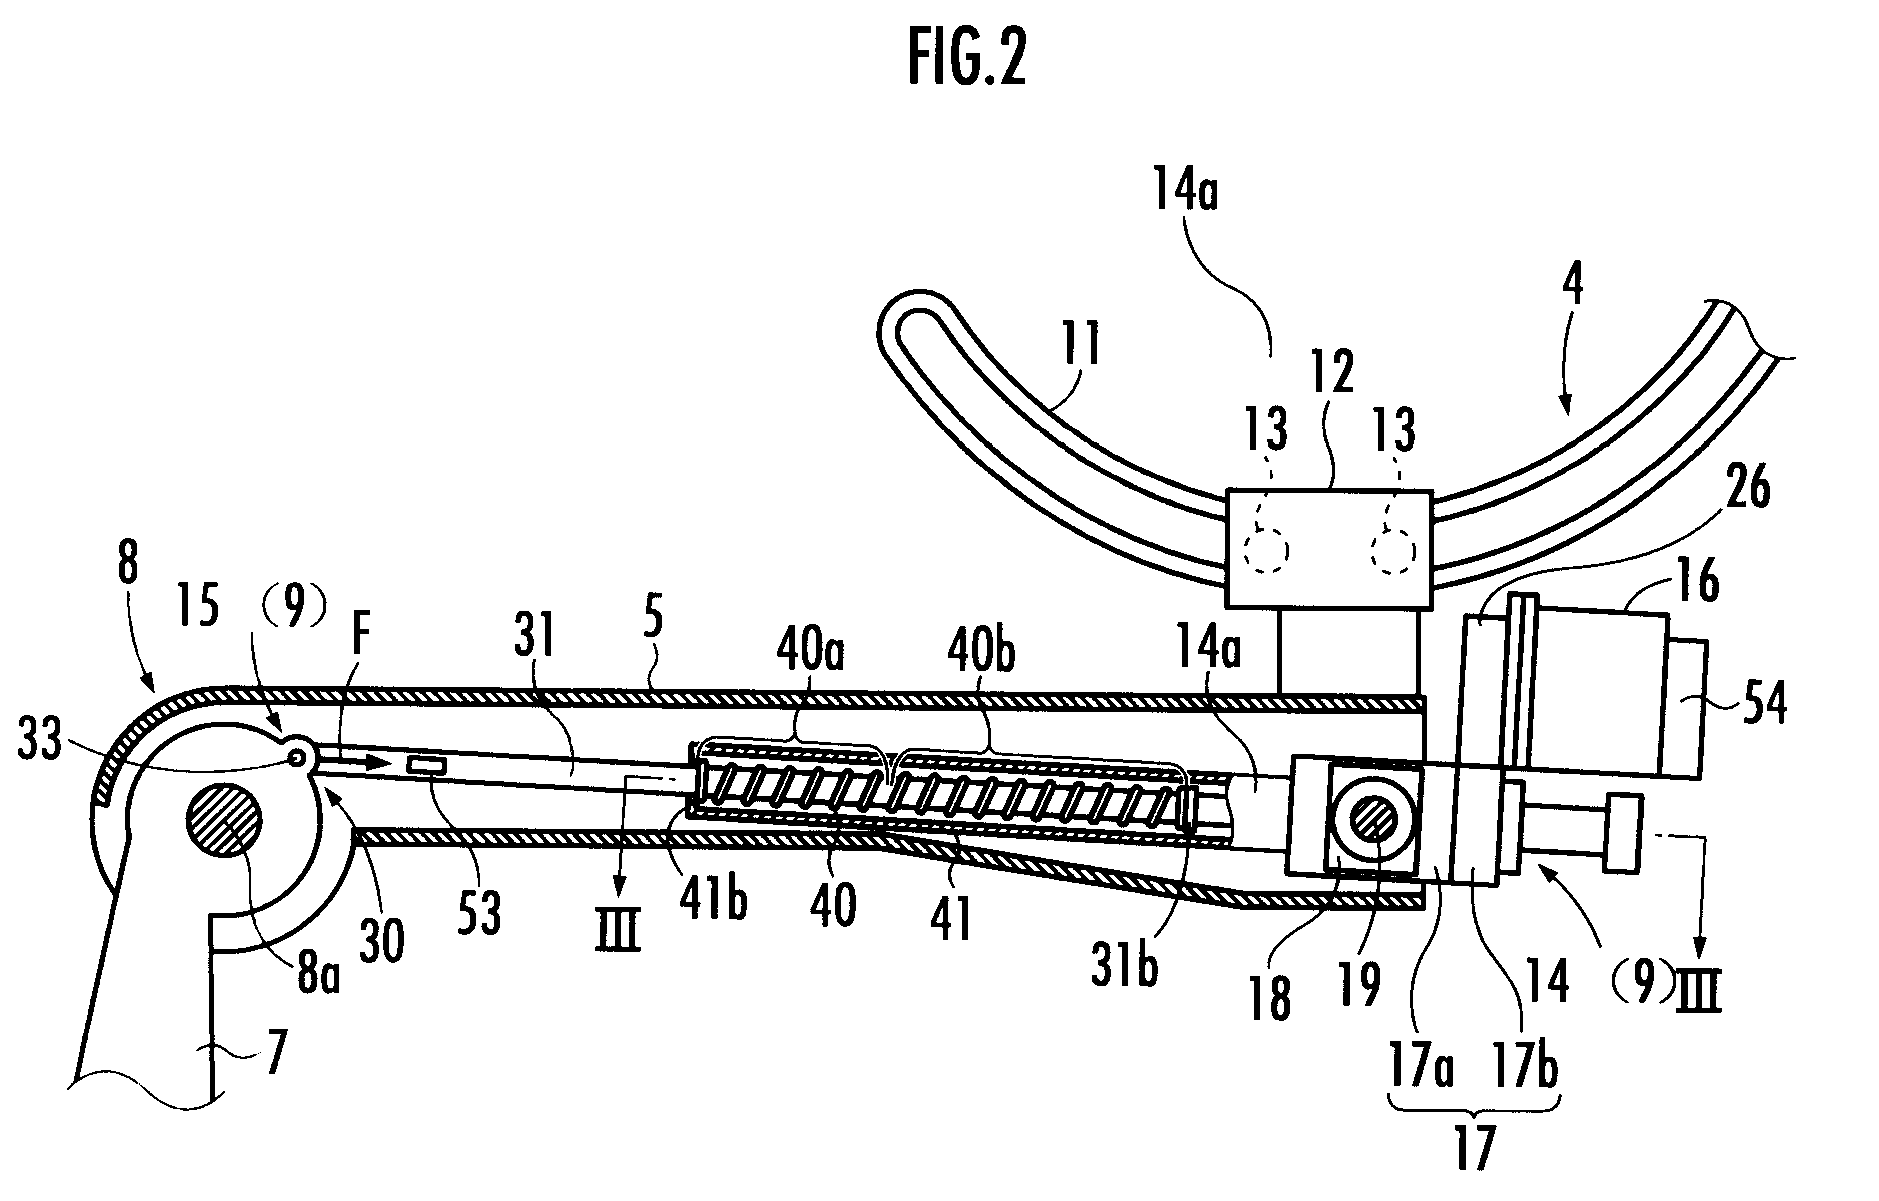 Walking assistance device and controller for the same